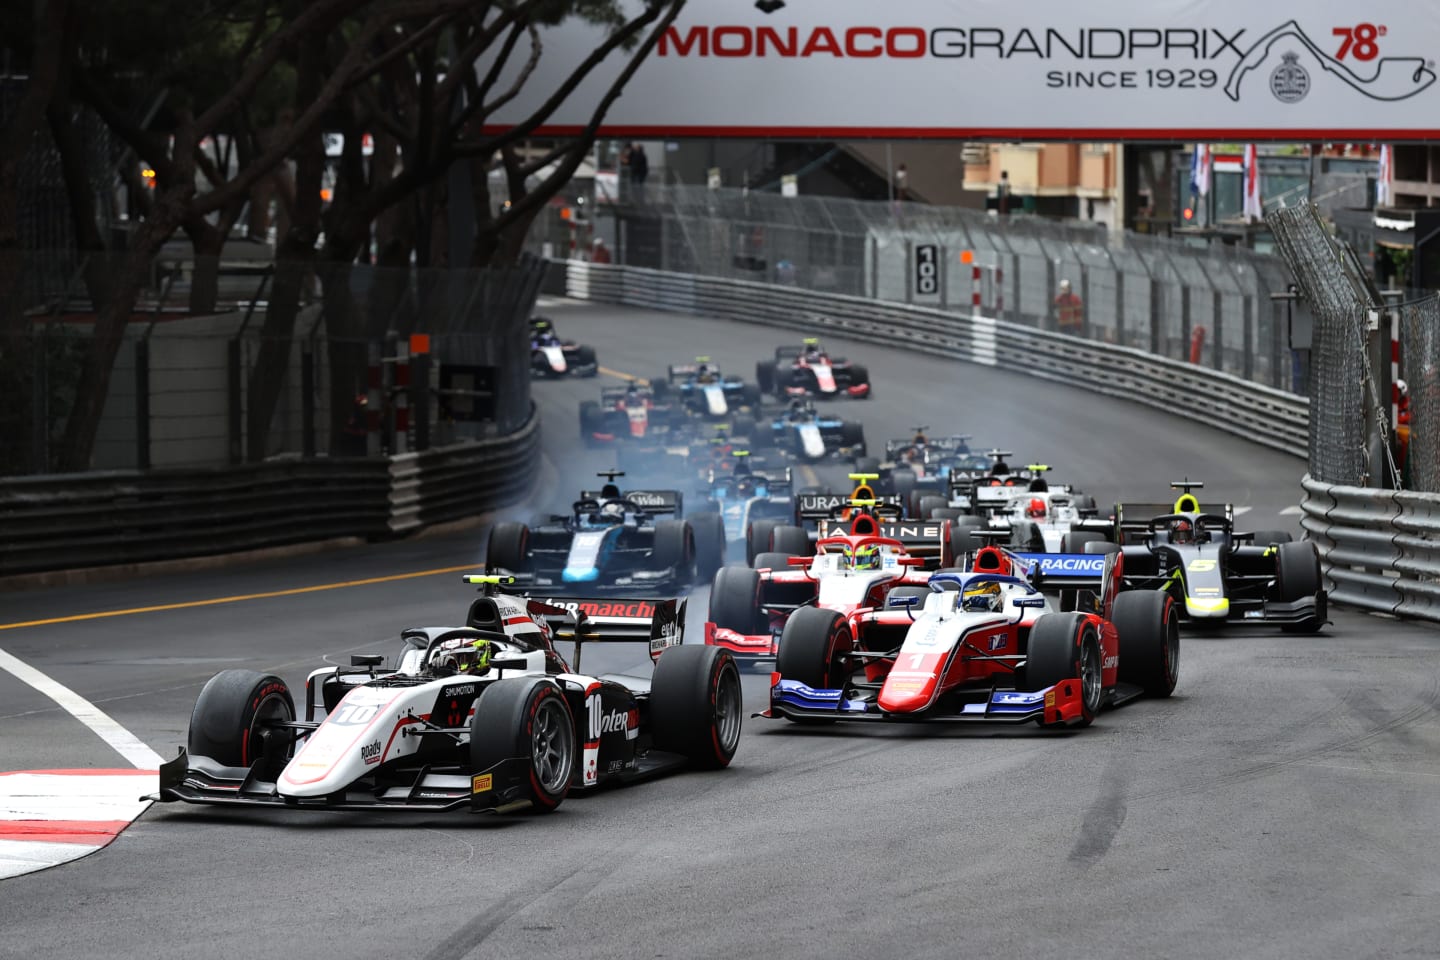 MONTE-CARLO, MONACO - MAY 22: Theo Pourchaire of France and ART Grand Prix (10) leads the field at